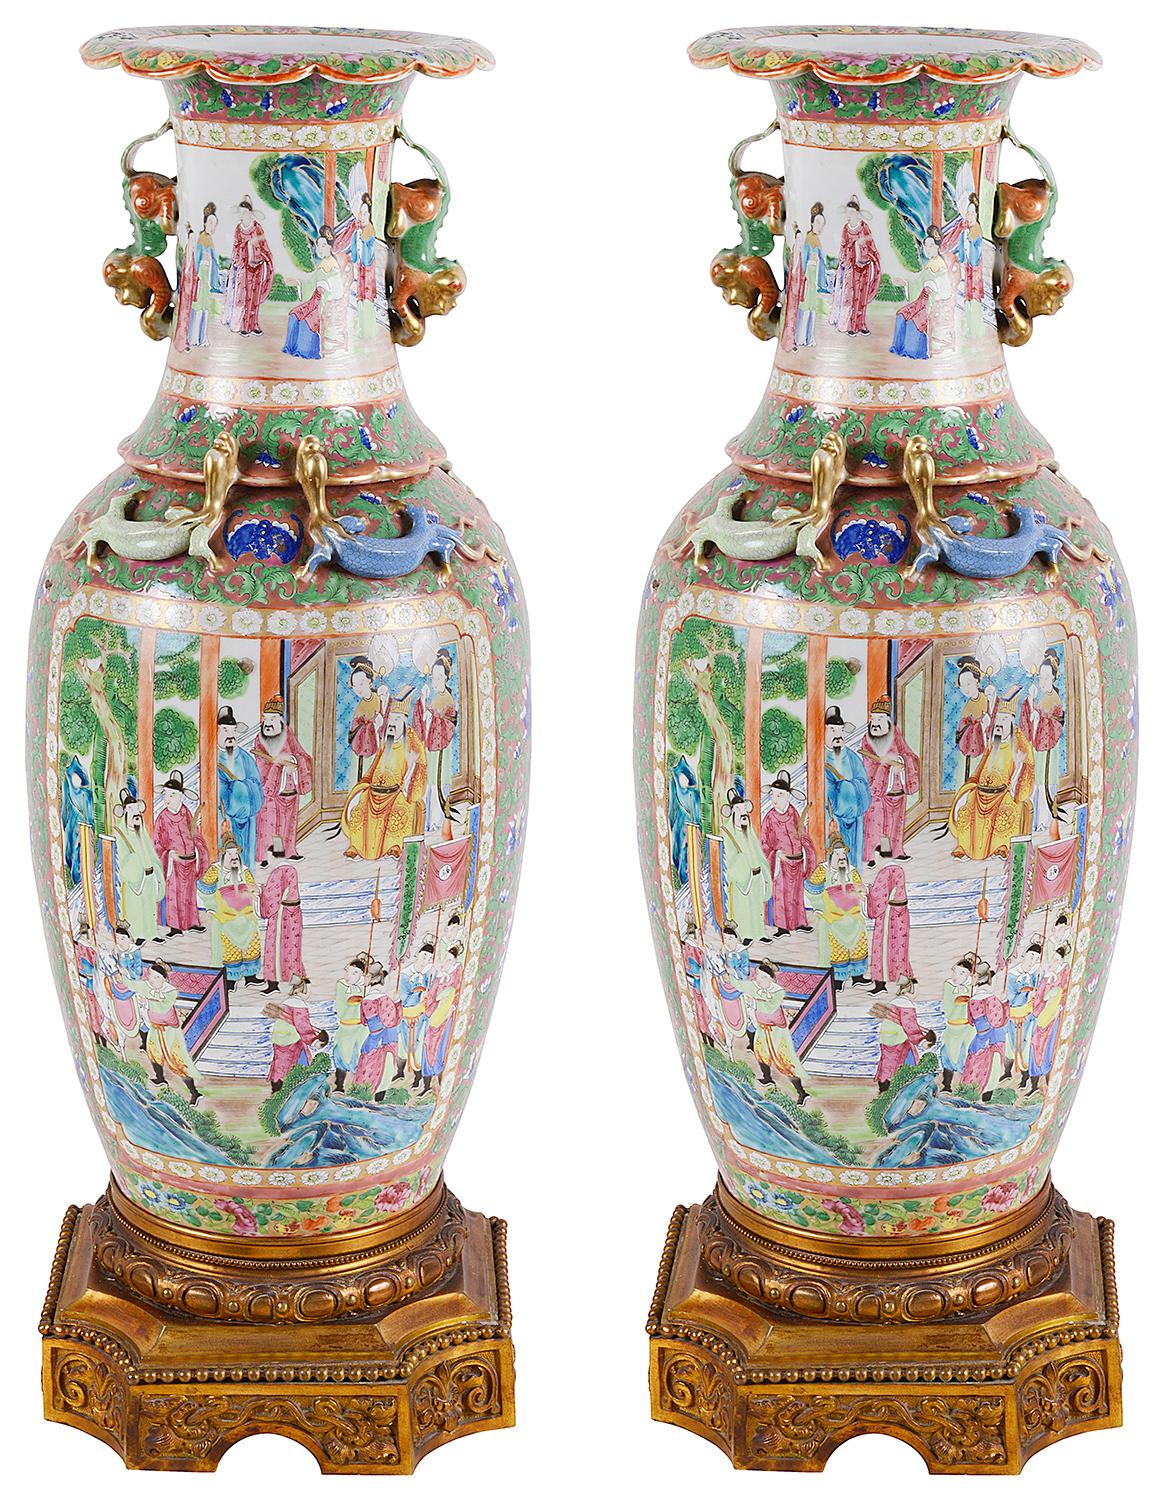 A very impressive pair of 19th century Chinese Cantonese or rose medallion vases or lamps. Each with wonderful bold colors, with classical oriental scenes of courtiers walking around pagoda buildings and gardens. The green ground having beautiful